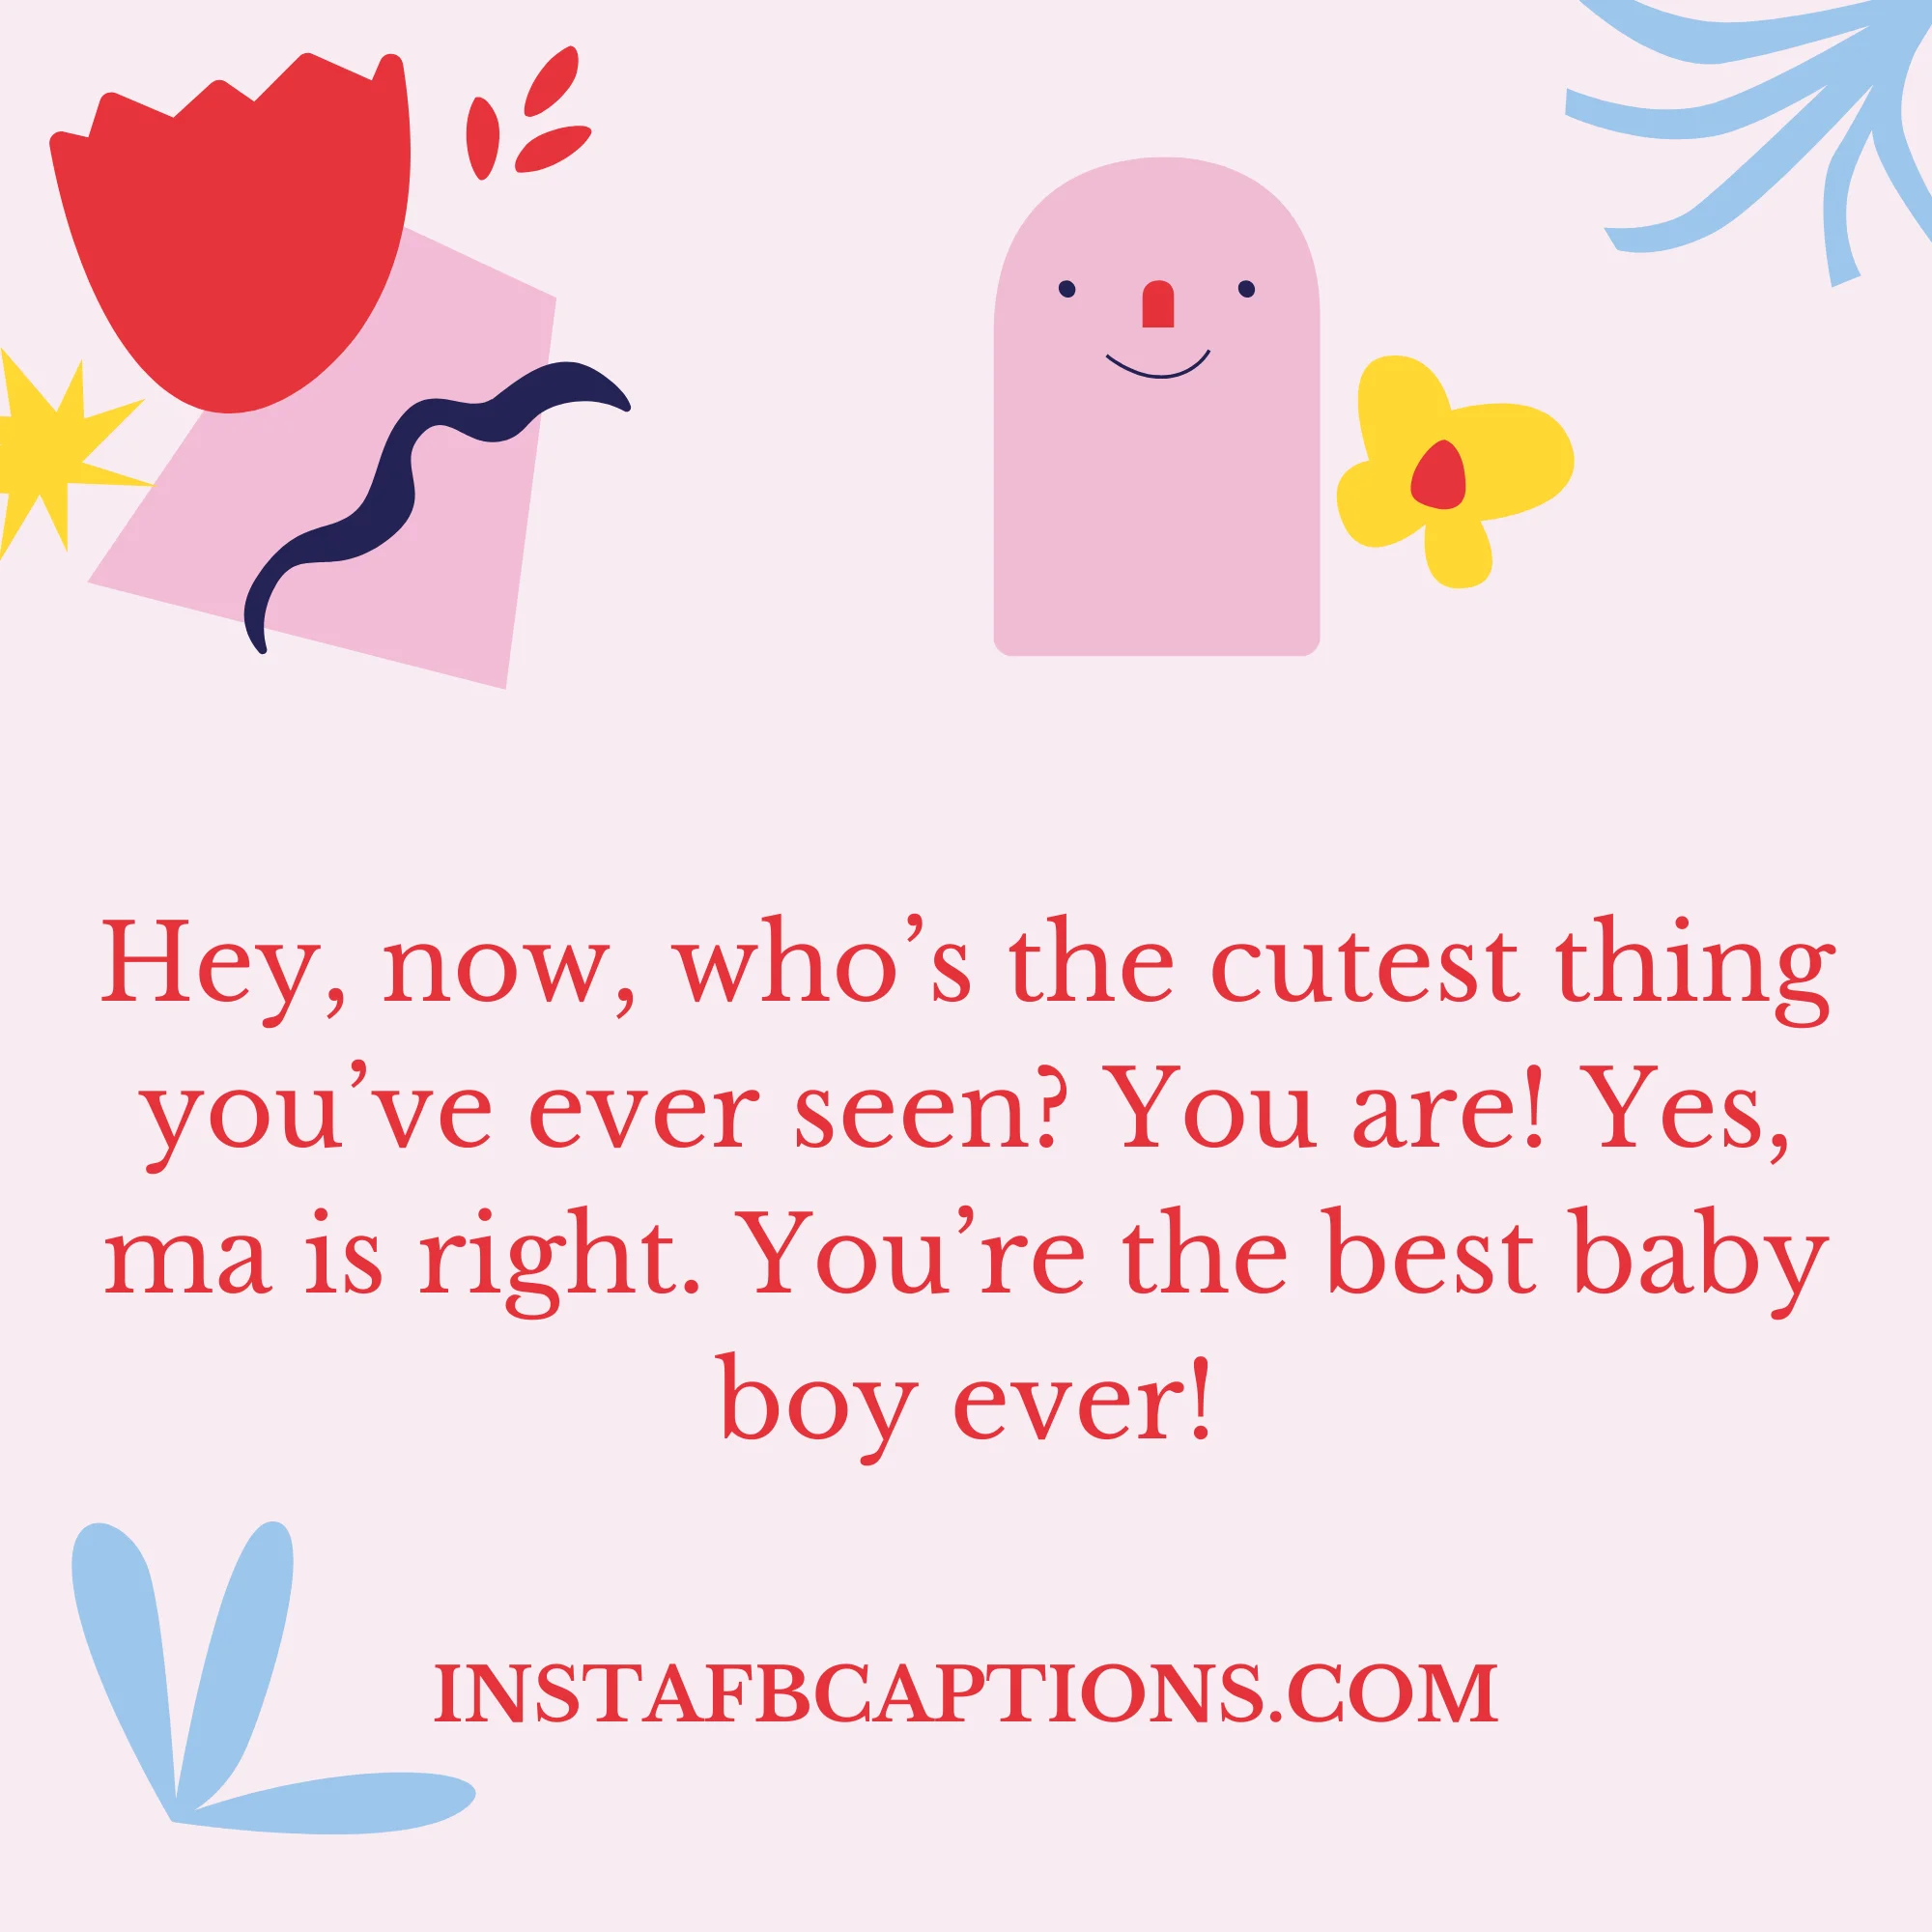 A text written - "Hey, now, who’s the cutest thing you’ve ever seen? You are! Yes, ma is right. You’re the best baby boy ever!"  - Sweet Captions for 6 Months Baby from Parents - 6 Month Old Baby Captions And Quotes For Instagram